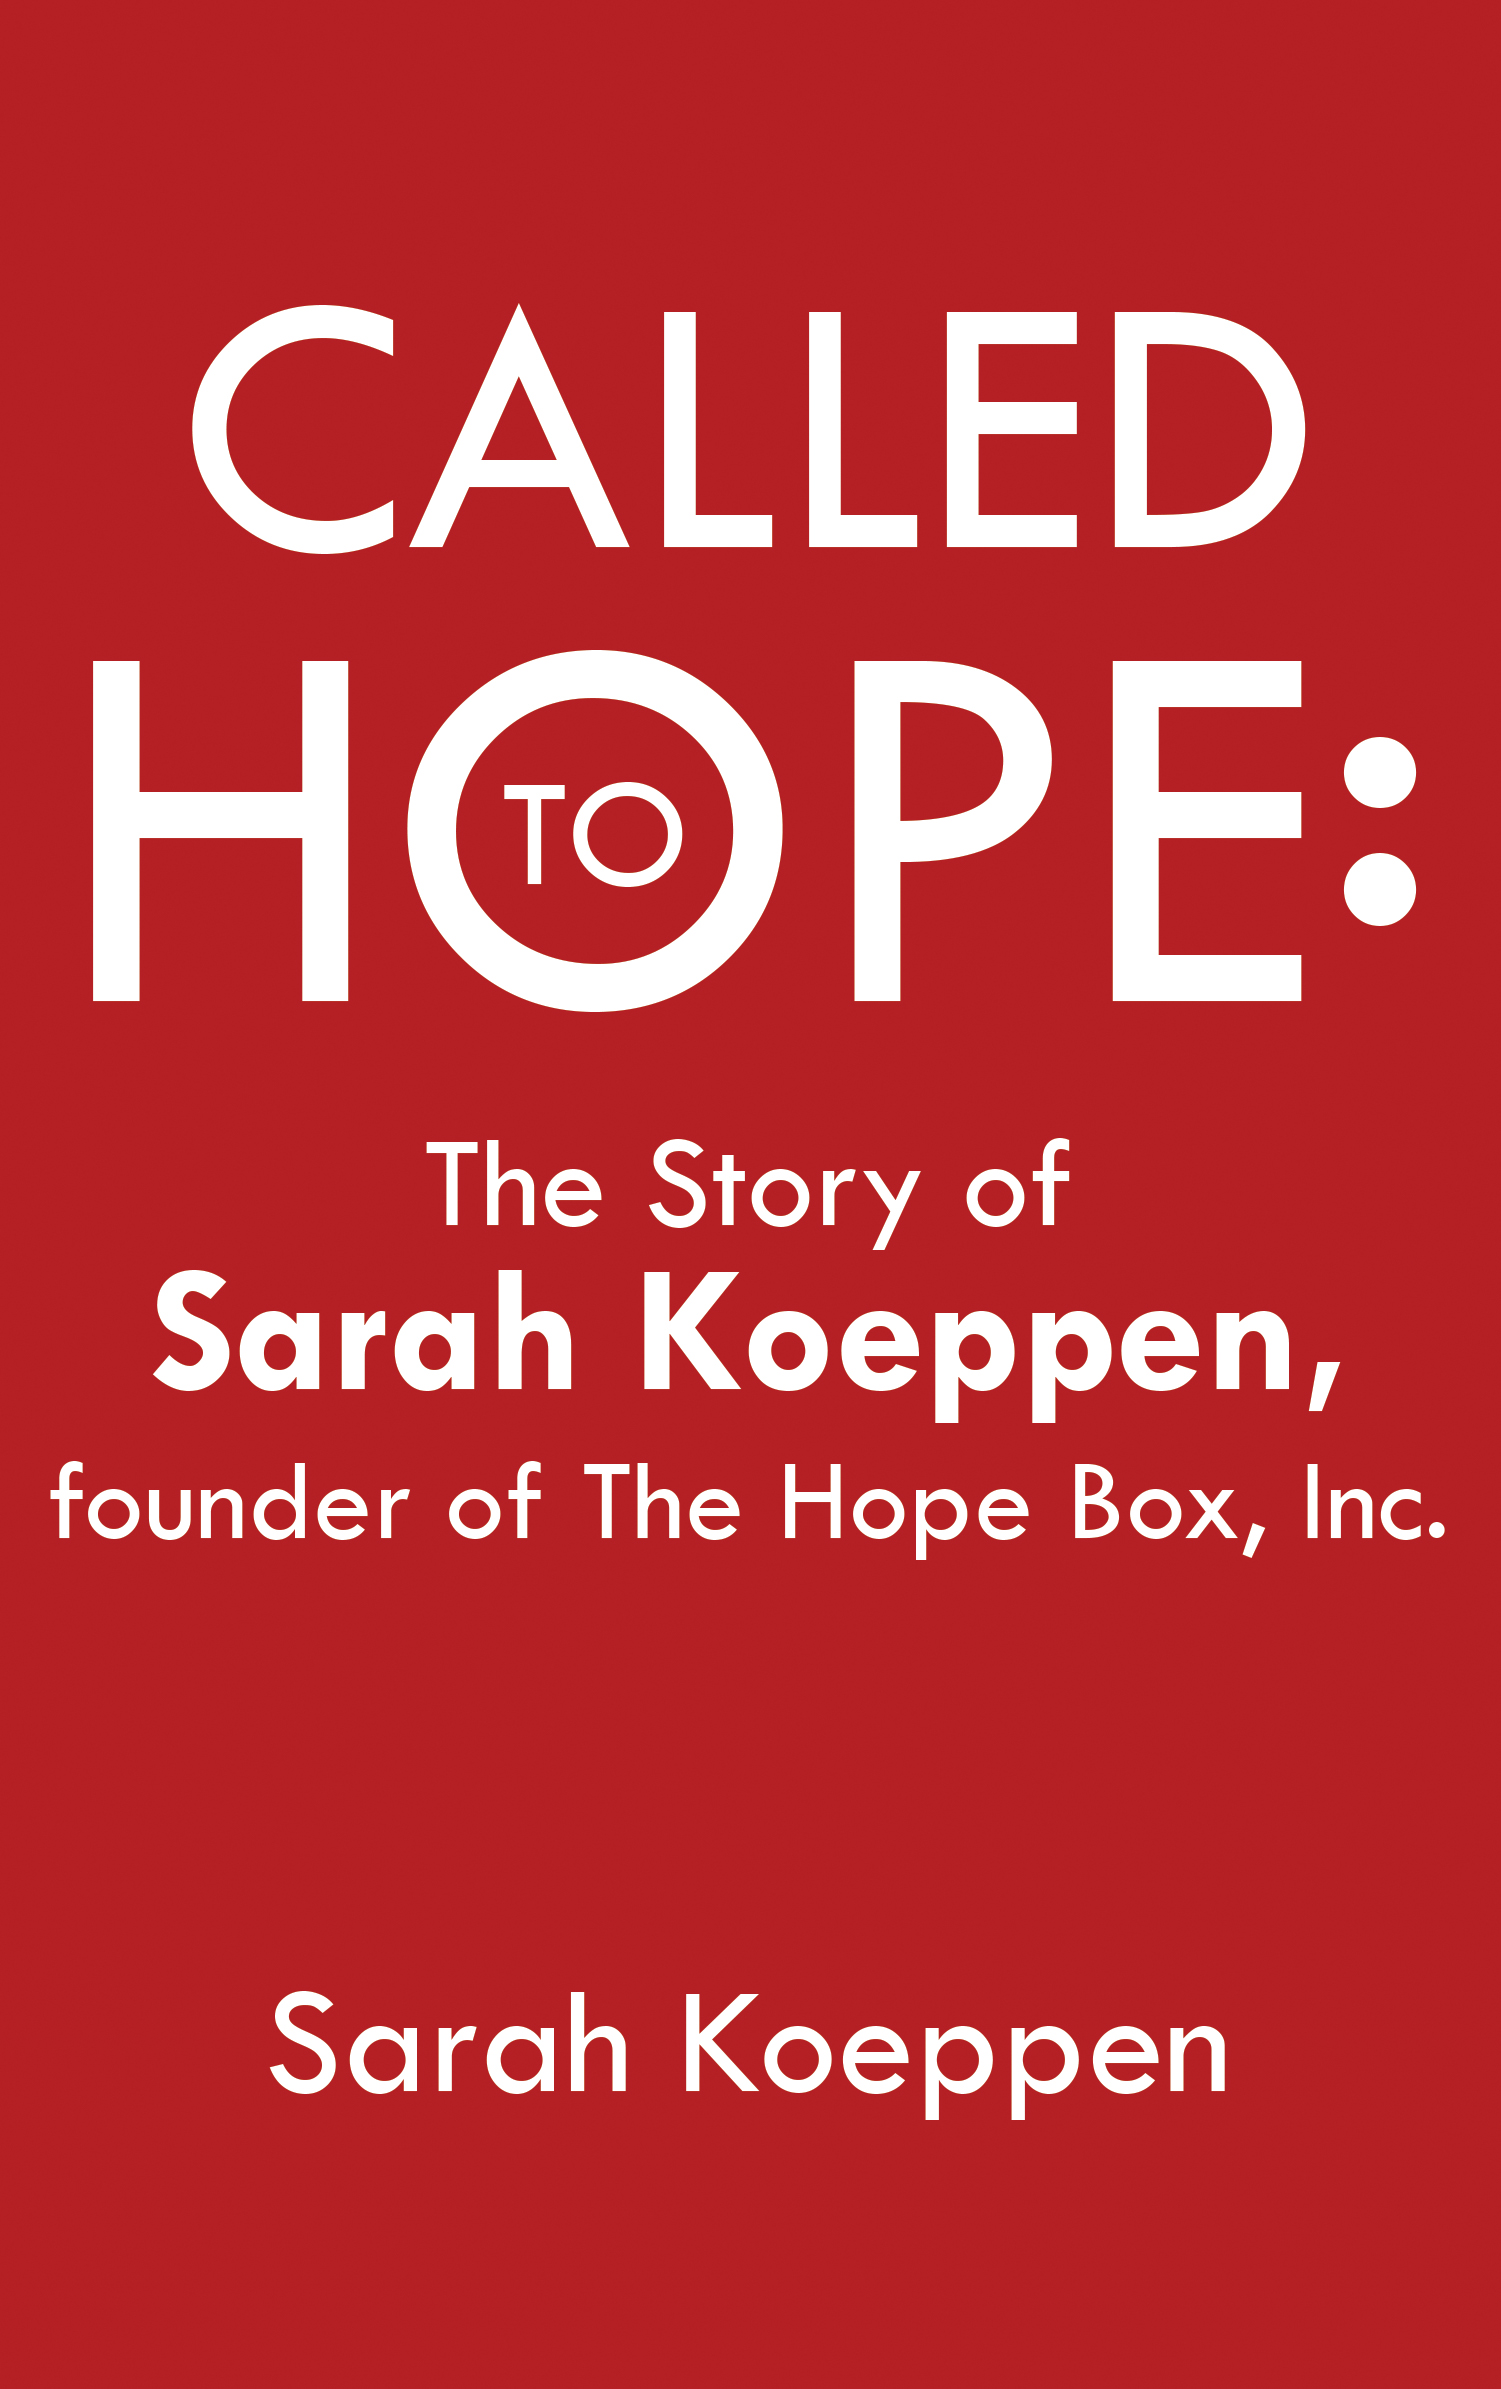 “Called to Hope: The Story of Sarah Koeppen, founder of The Hope Box, Inc.” by Sarah Koeppen